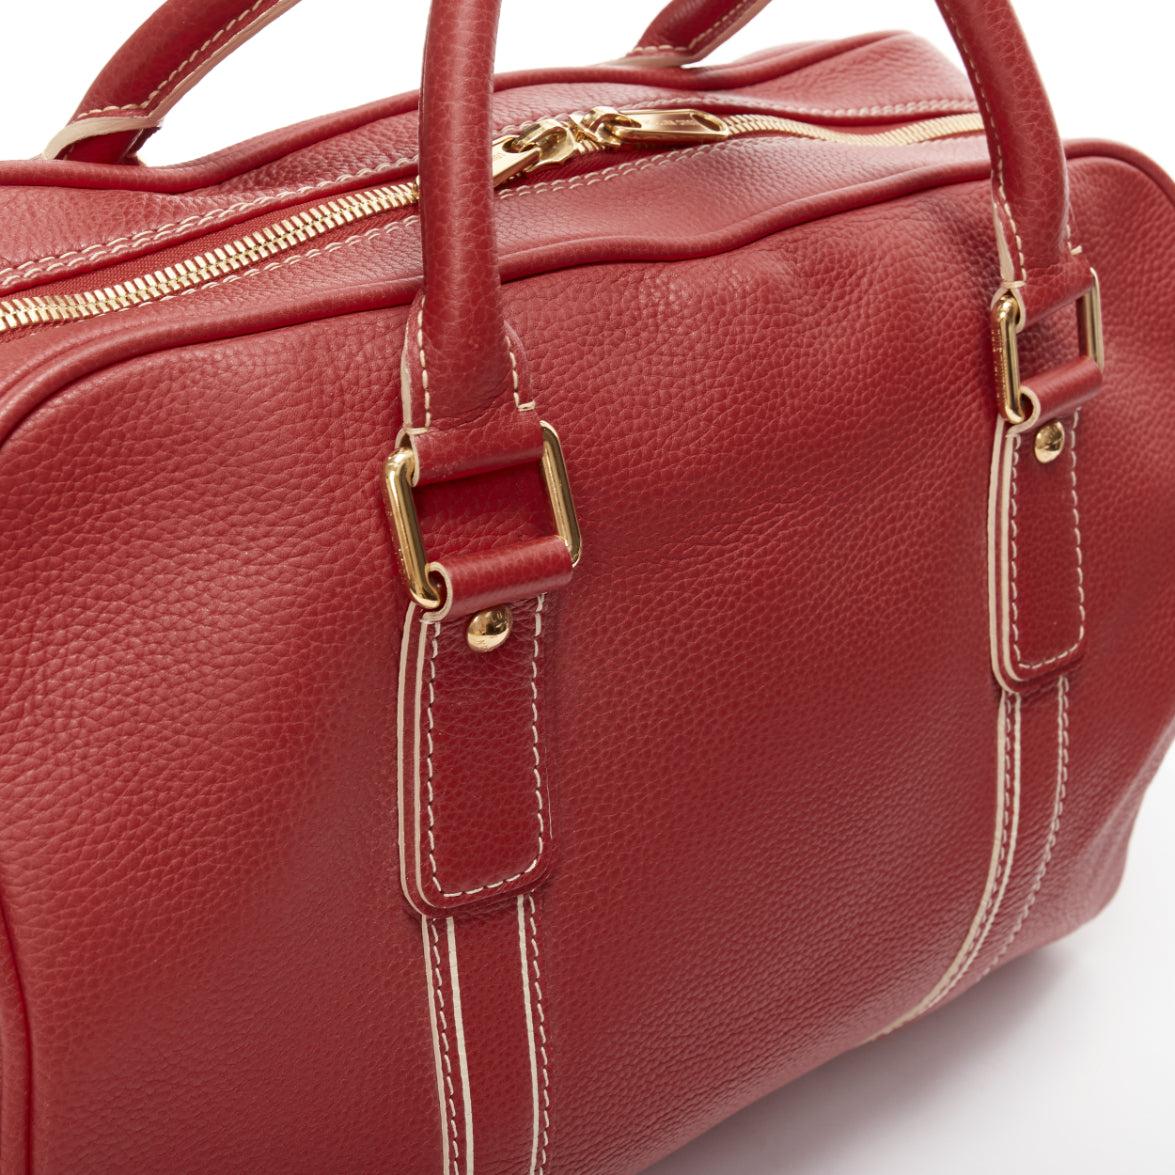 LOUIS VUITTON Red Tobaco Leather Carryall Boston Duffle top handle travel bag For Sale 5